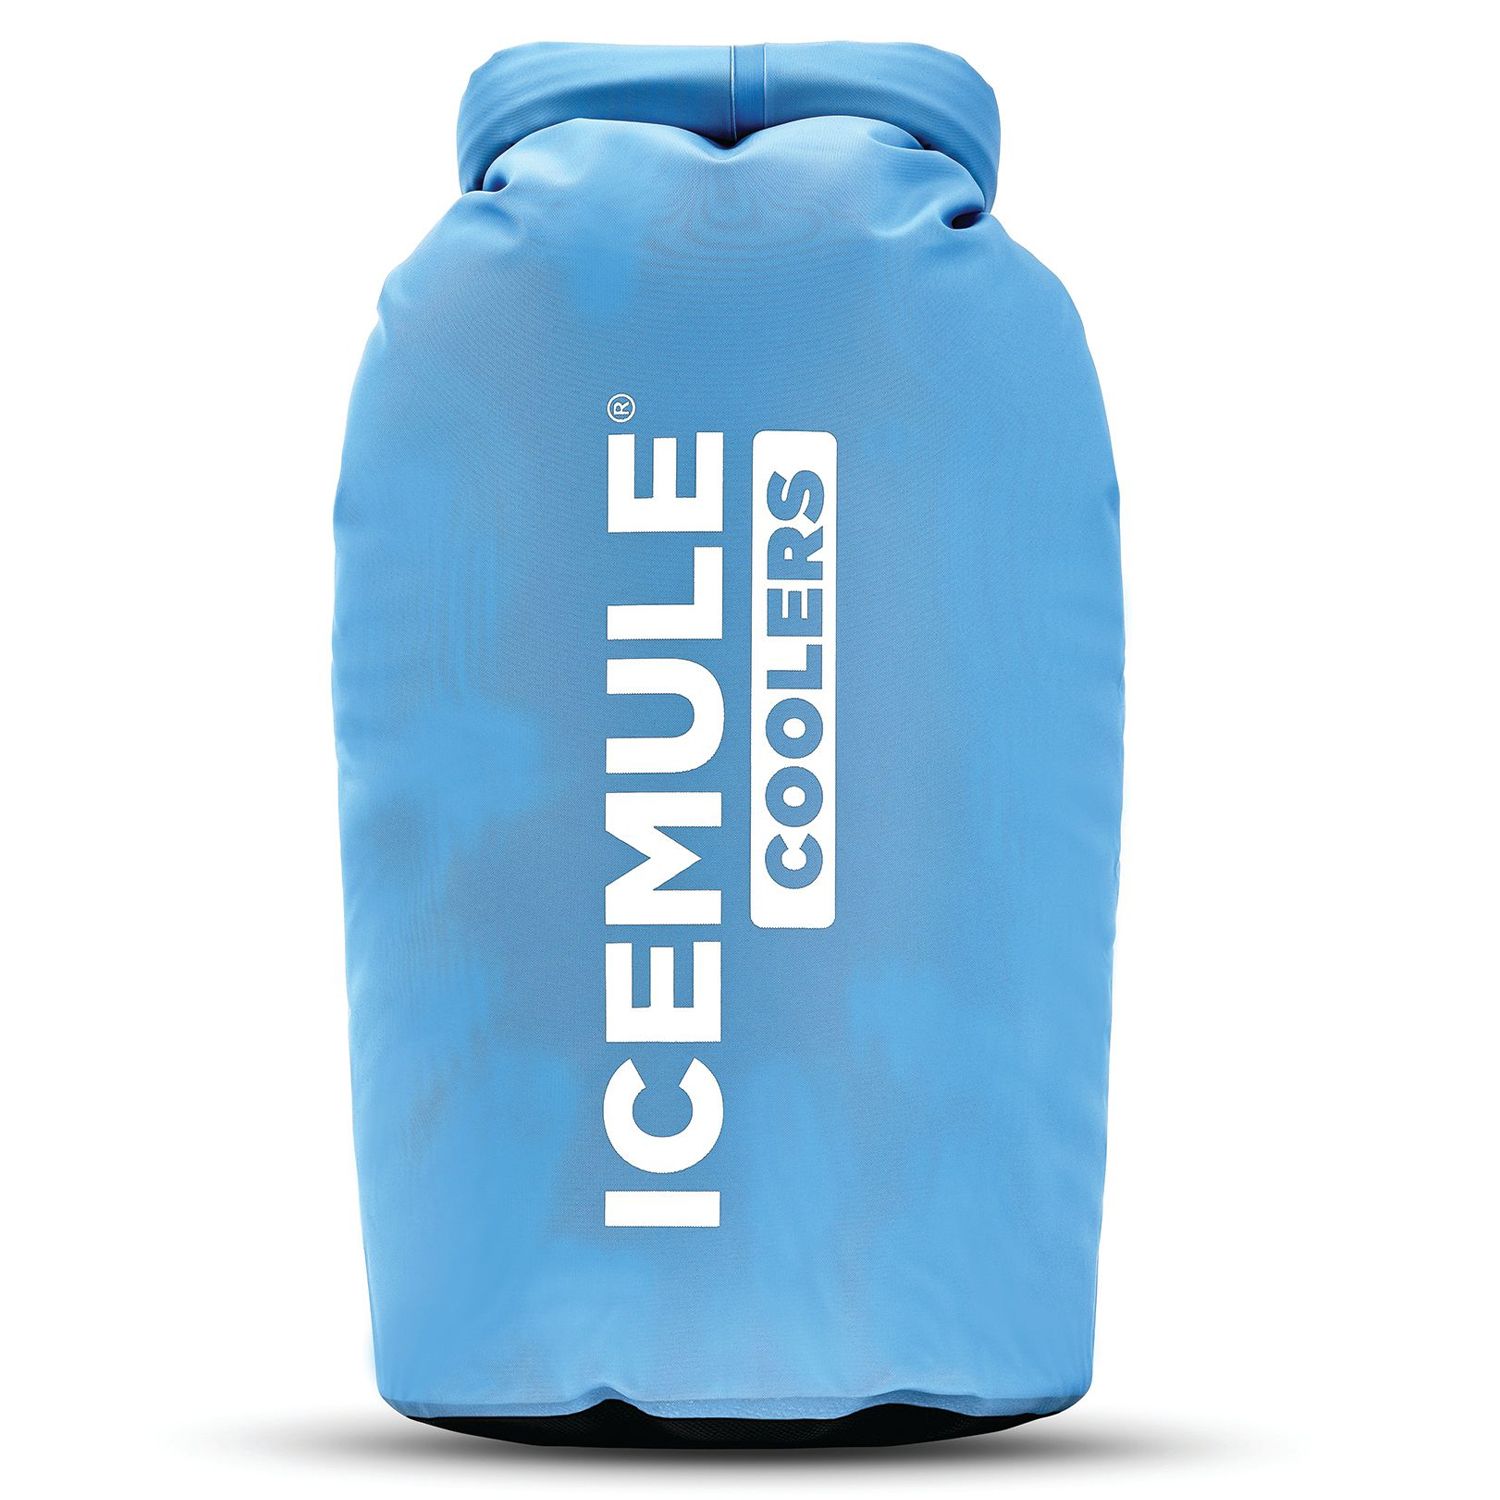 Image for ICEMULE IceMule Classic Small 10 Liter 6 Can Soft Insulated Waterproof Backpack Cooler at Kohl's.